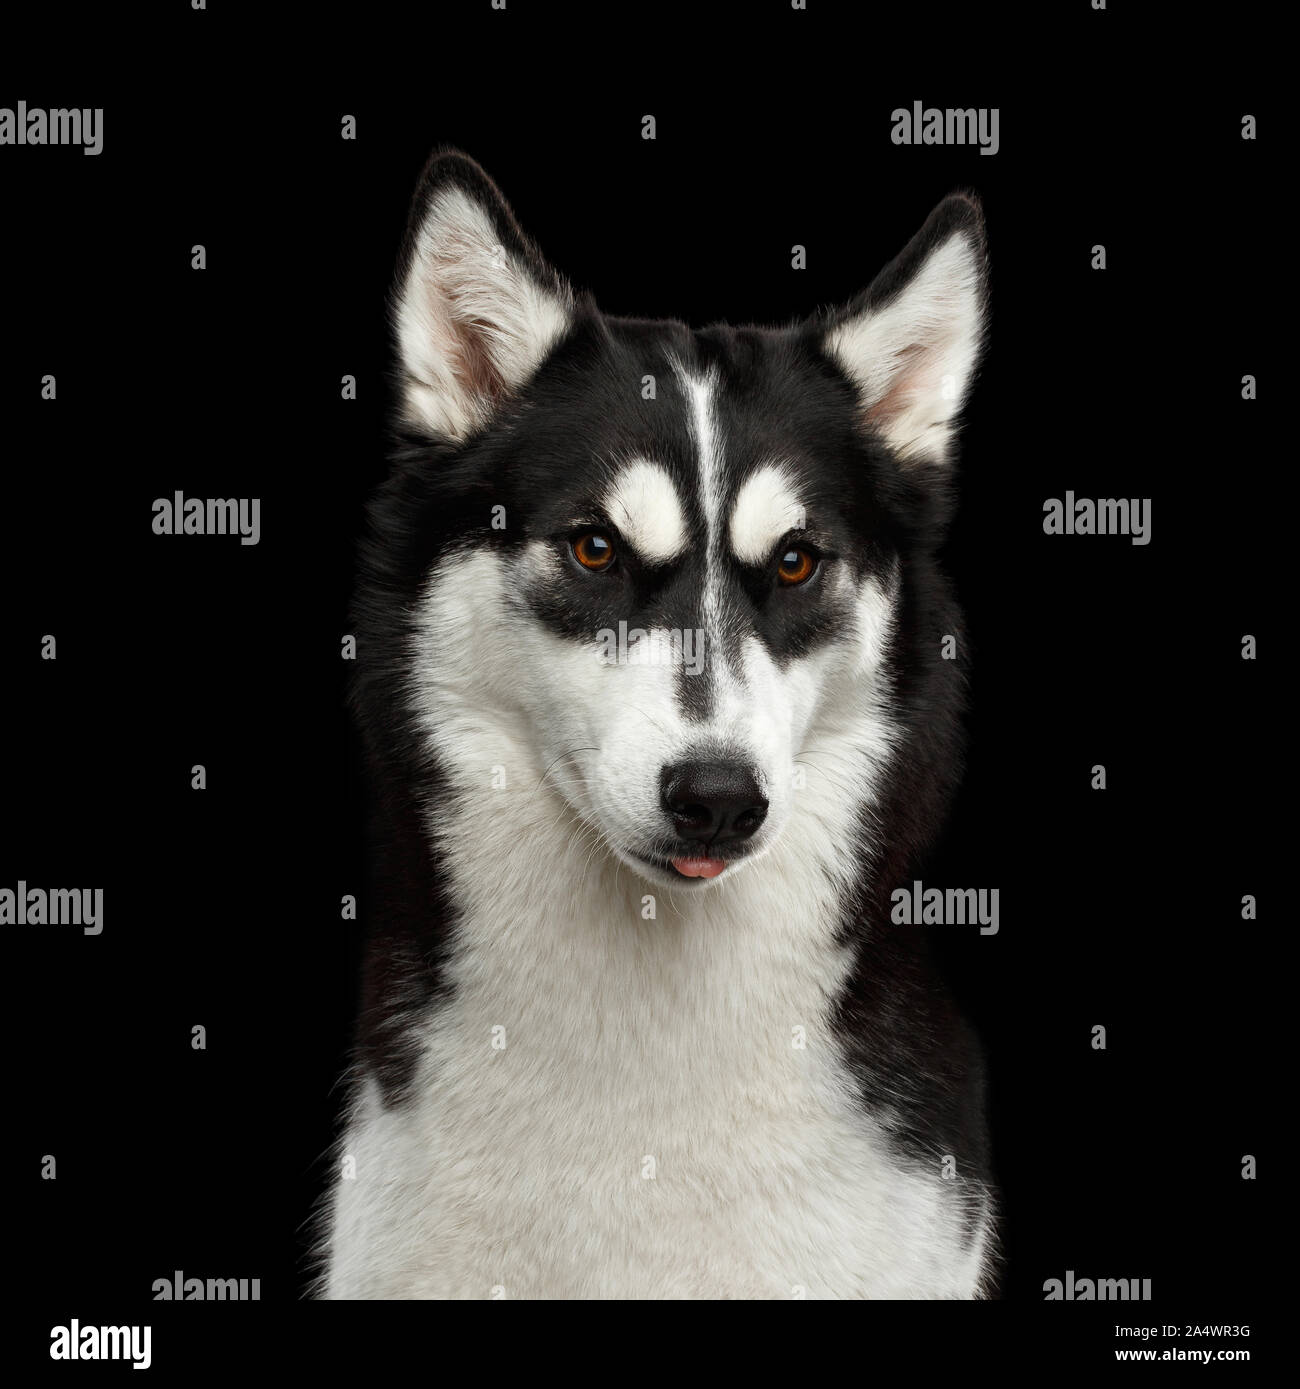 Funny Portrait of Siberian Husky Dog with angry eyebrows Gazing and showing Tongue on Isolated Black Background Stock Photo